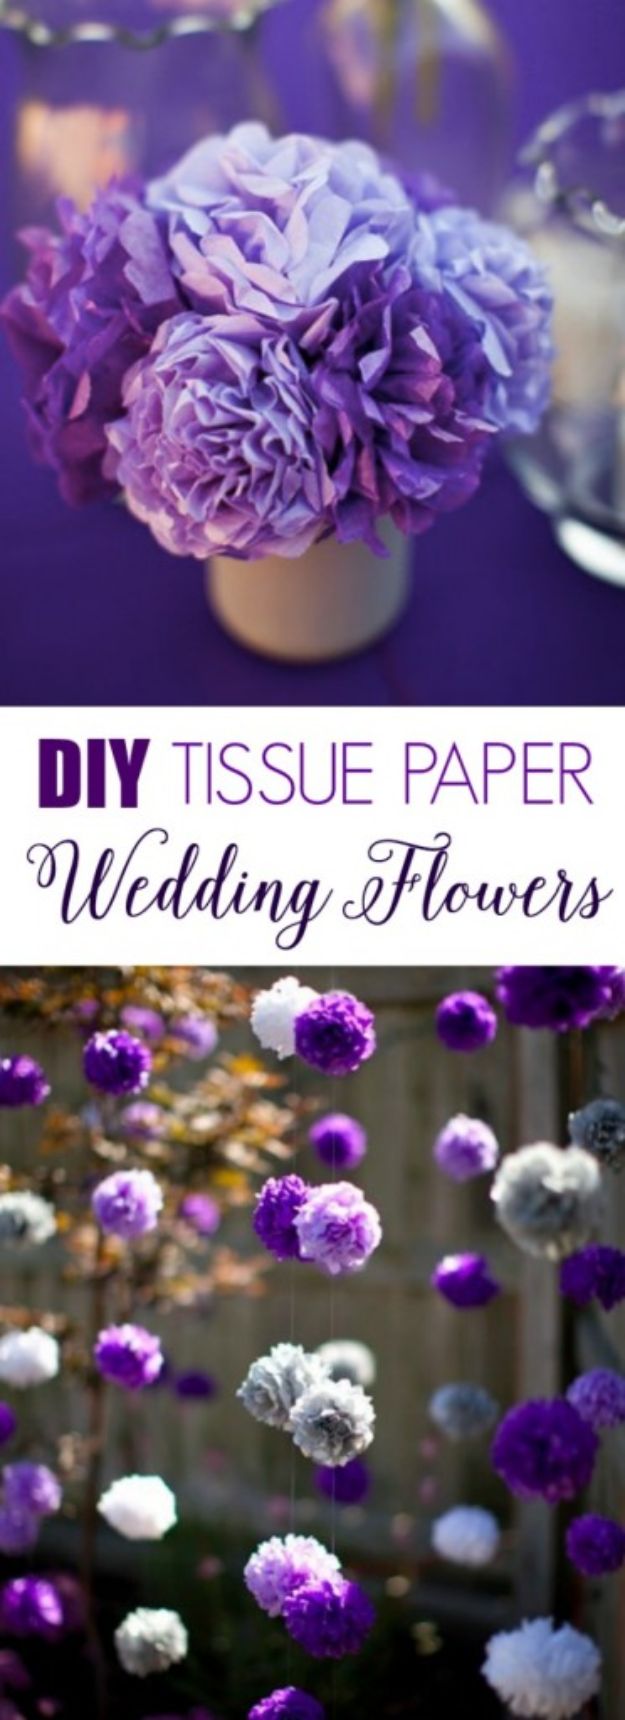 Dollar Tree Wedding Ideas - DIY Tissue Paper Wedding Flowers - Cheap and Easy Dollar Store Crafts from Your Local Dollar Tree Store - Inexpensive Wedding Decor for the Bride on A Budget - Crafts and Centerpieces, Guest Book, Favors and Decorations You Can Make for Weddings - Pretty, Creative Flowers, Table Decor, Place Cards, Signs and Event Planning Idea 